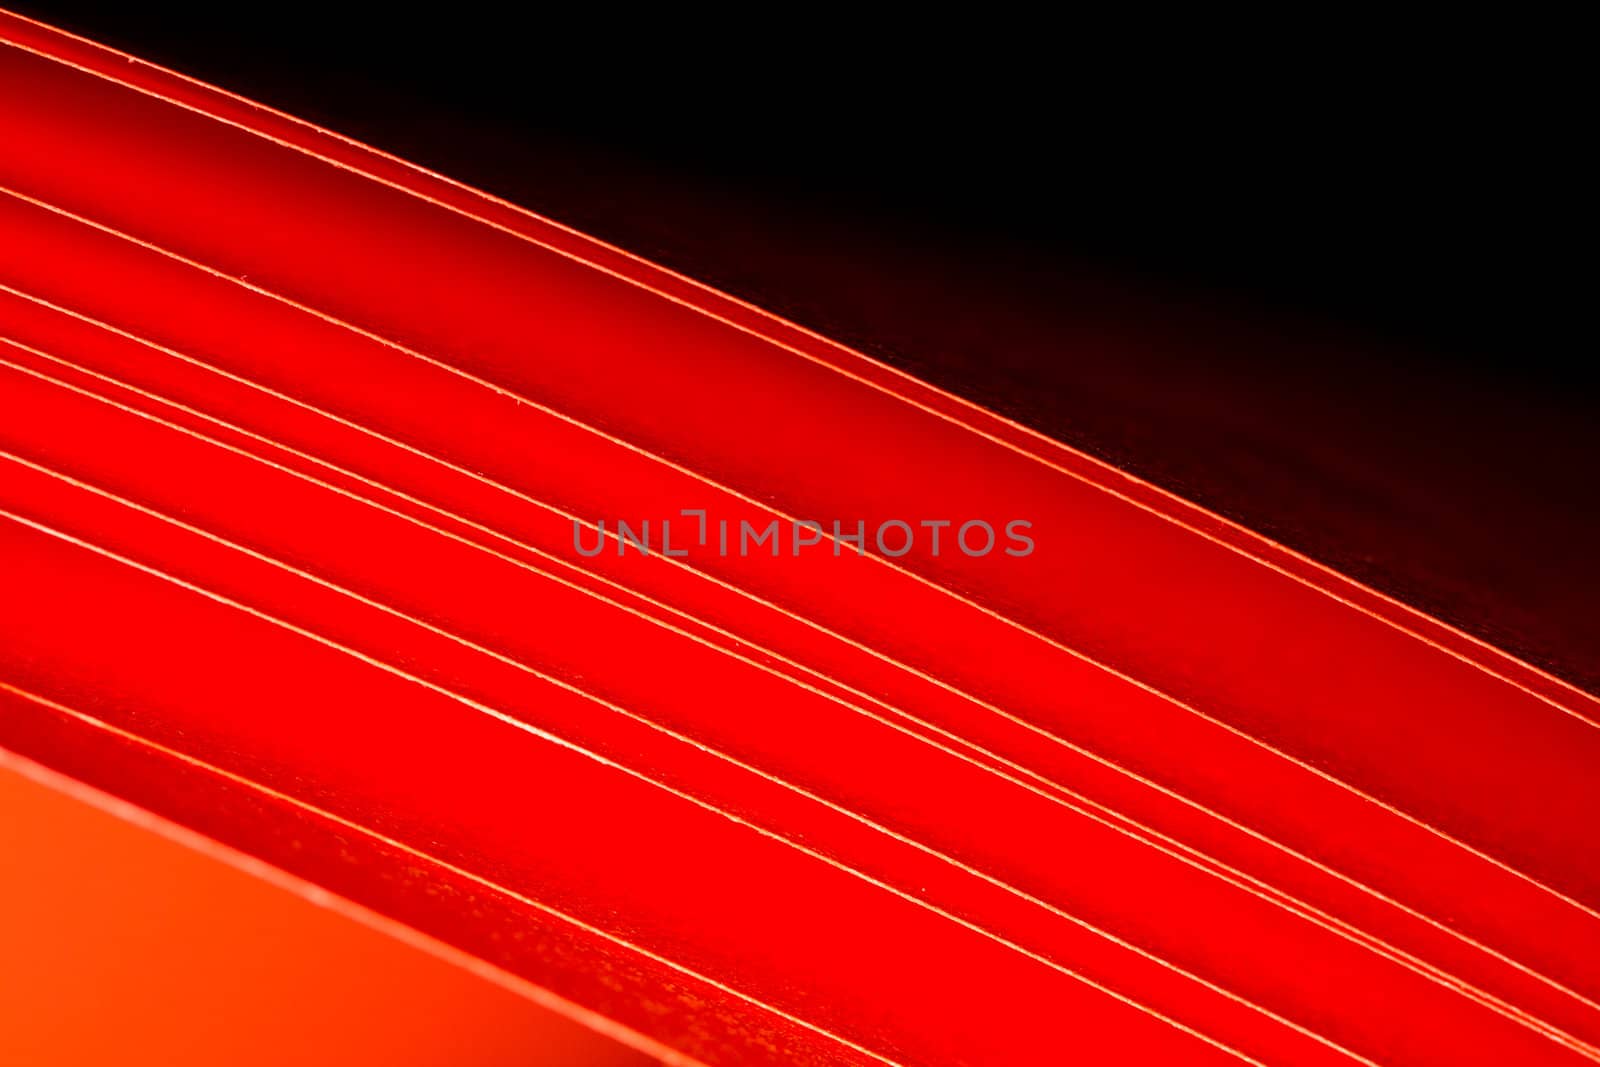 The red A4 paper illuminated with LED lights as background abstract